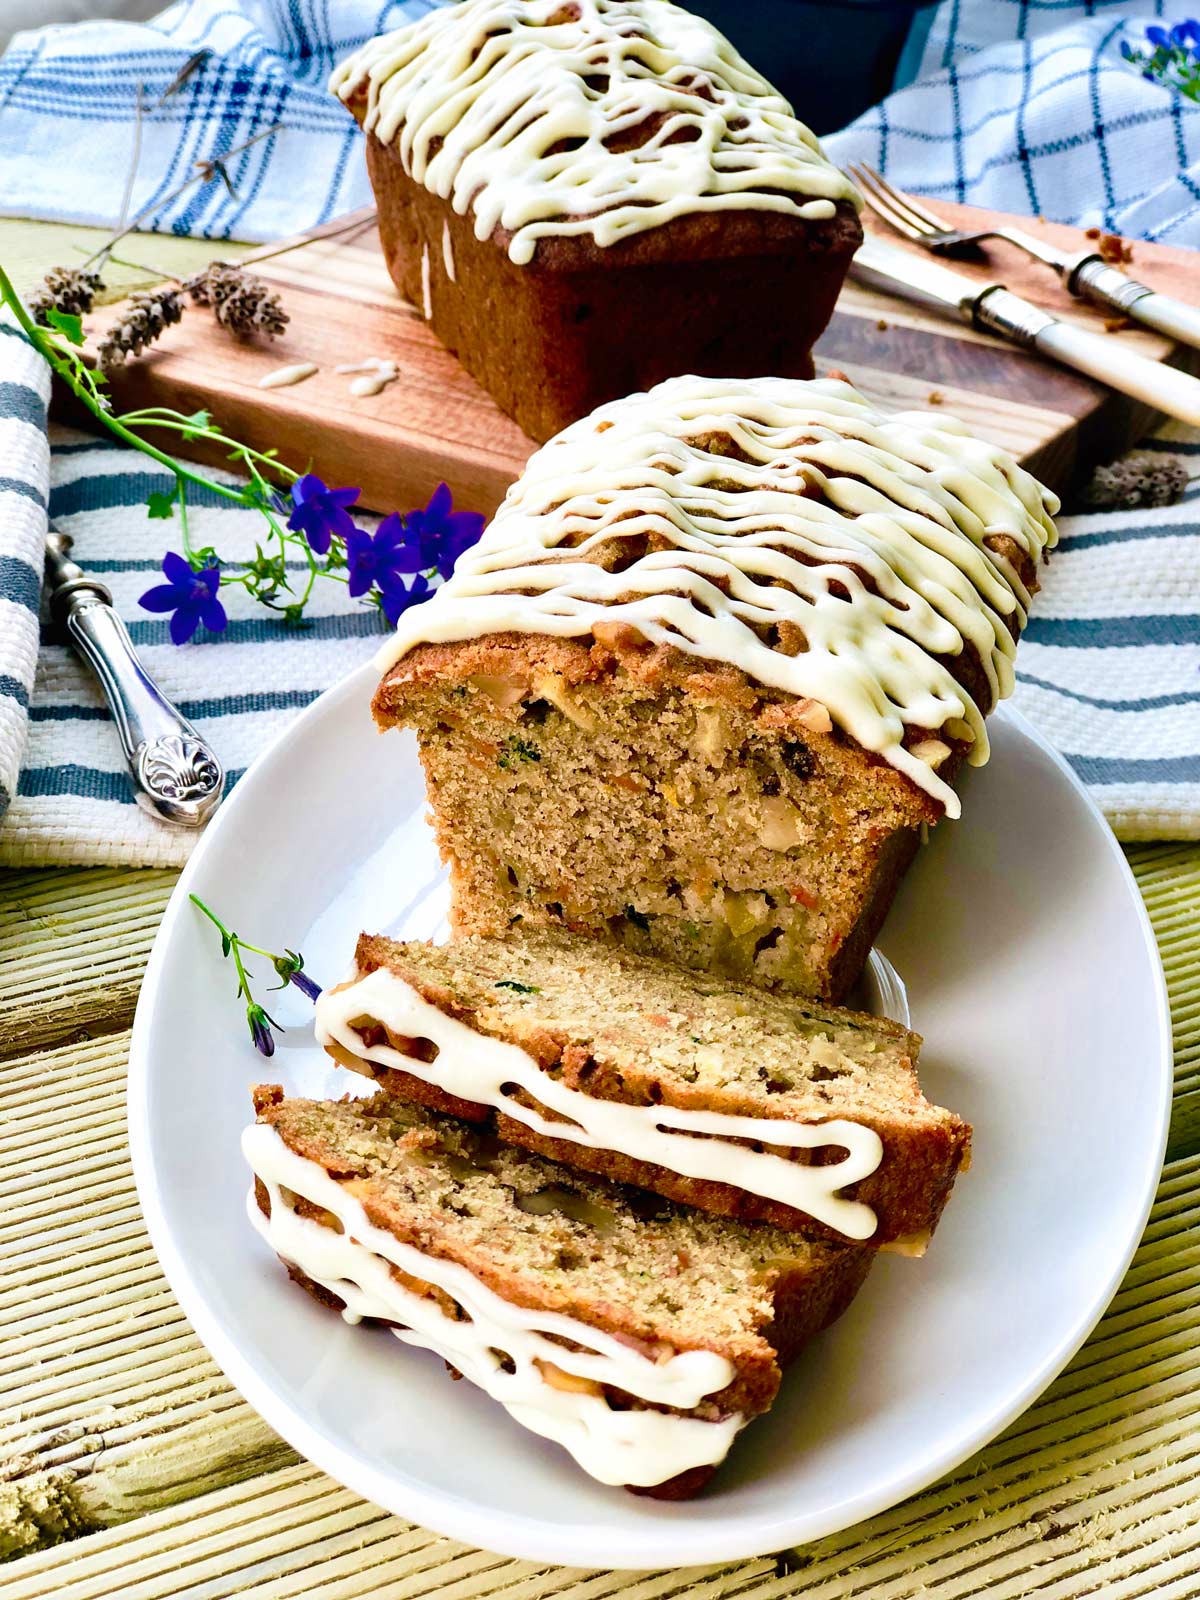 Apple, carrot and zucchini cake with ginger and turmeric